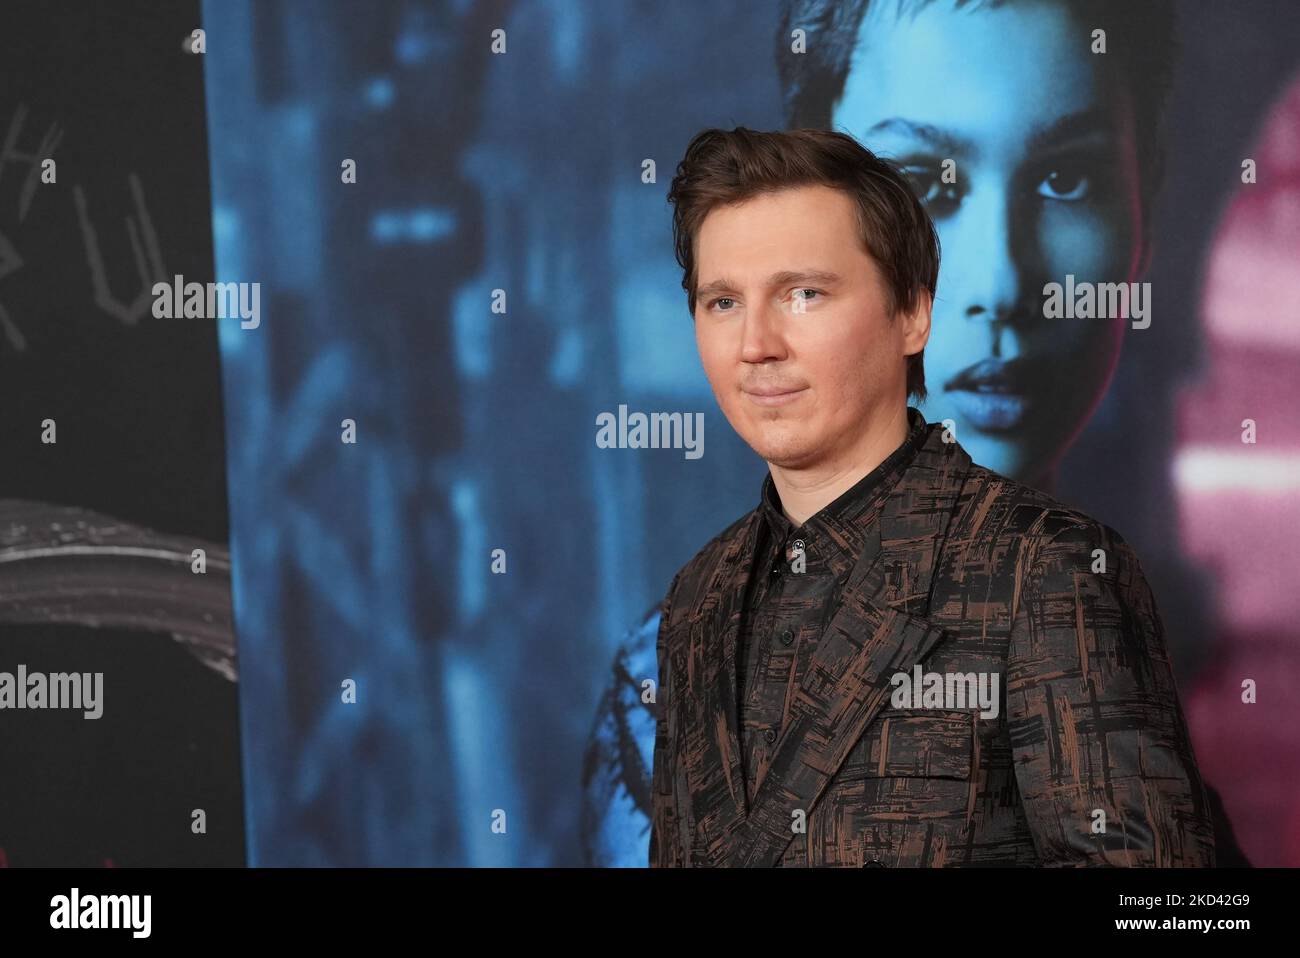 Paul Dano attend the world premiere of 'The Batman' at Lincoln Center Josie Robertson Plaza on Tuesday, March 1, 2022, in New York. (Photo by John Nacion/NurPhoto) Stock Photo